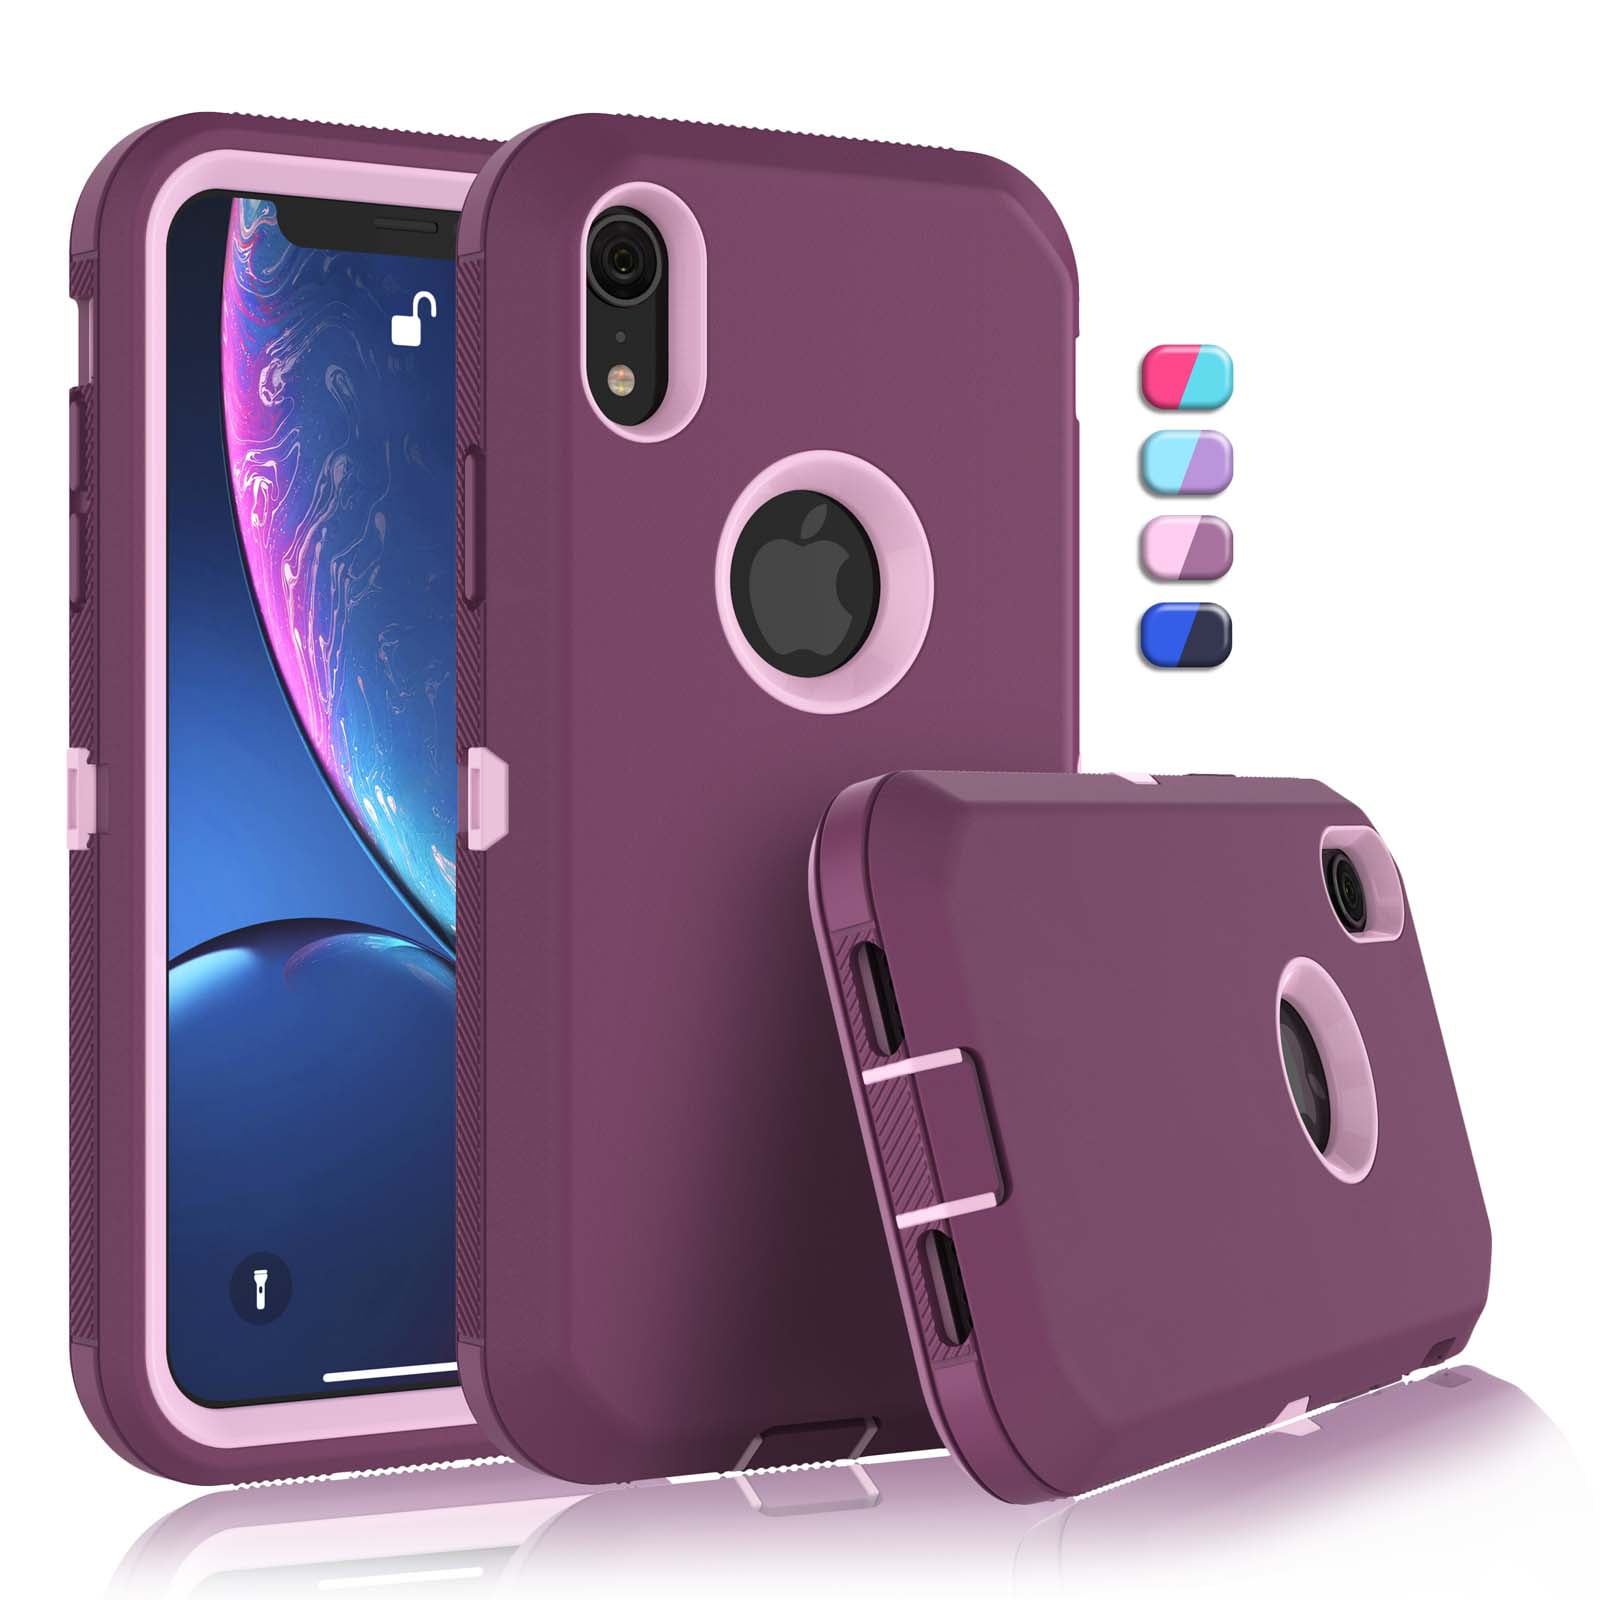 iPhone XR Cases, Sturdy Phone Case for iPhone XR 6.1", Tekcoo Full-Body